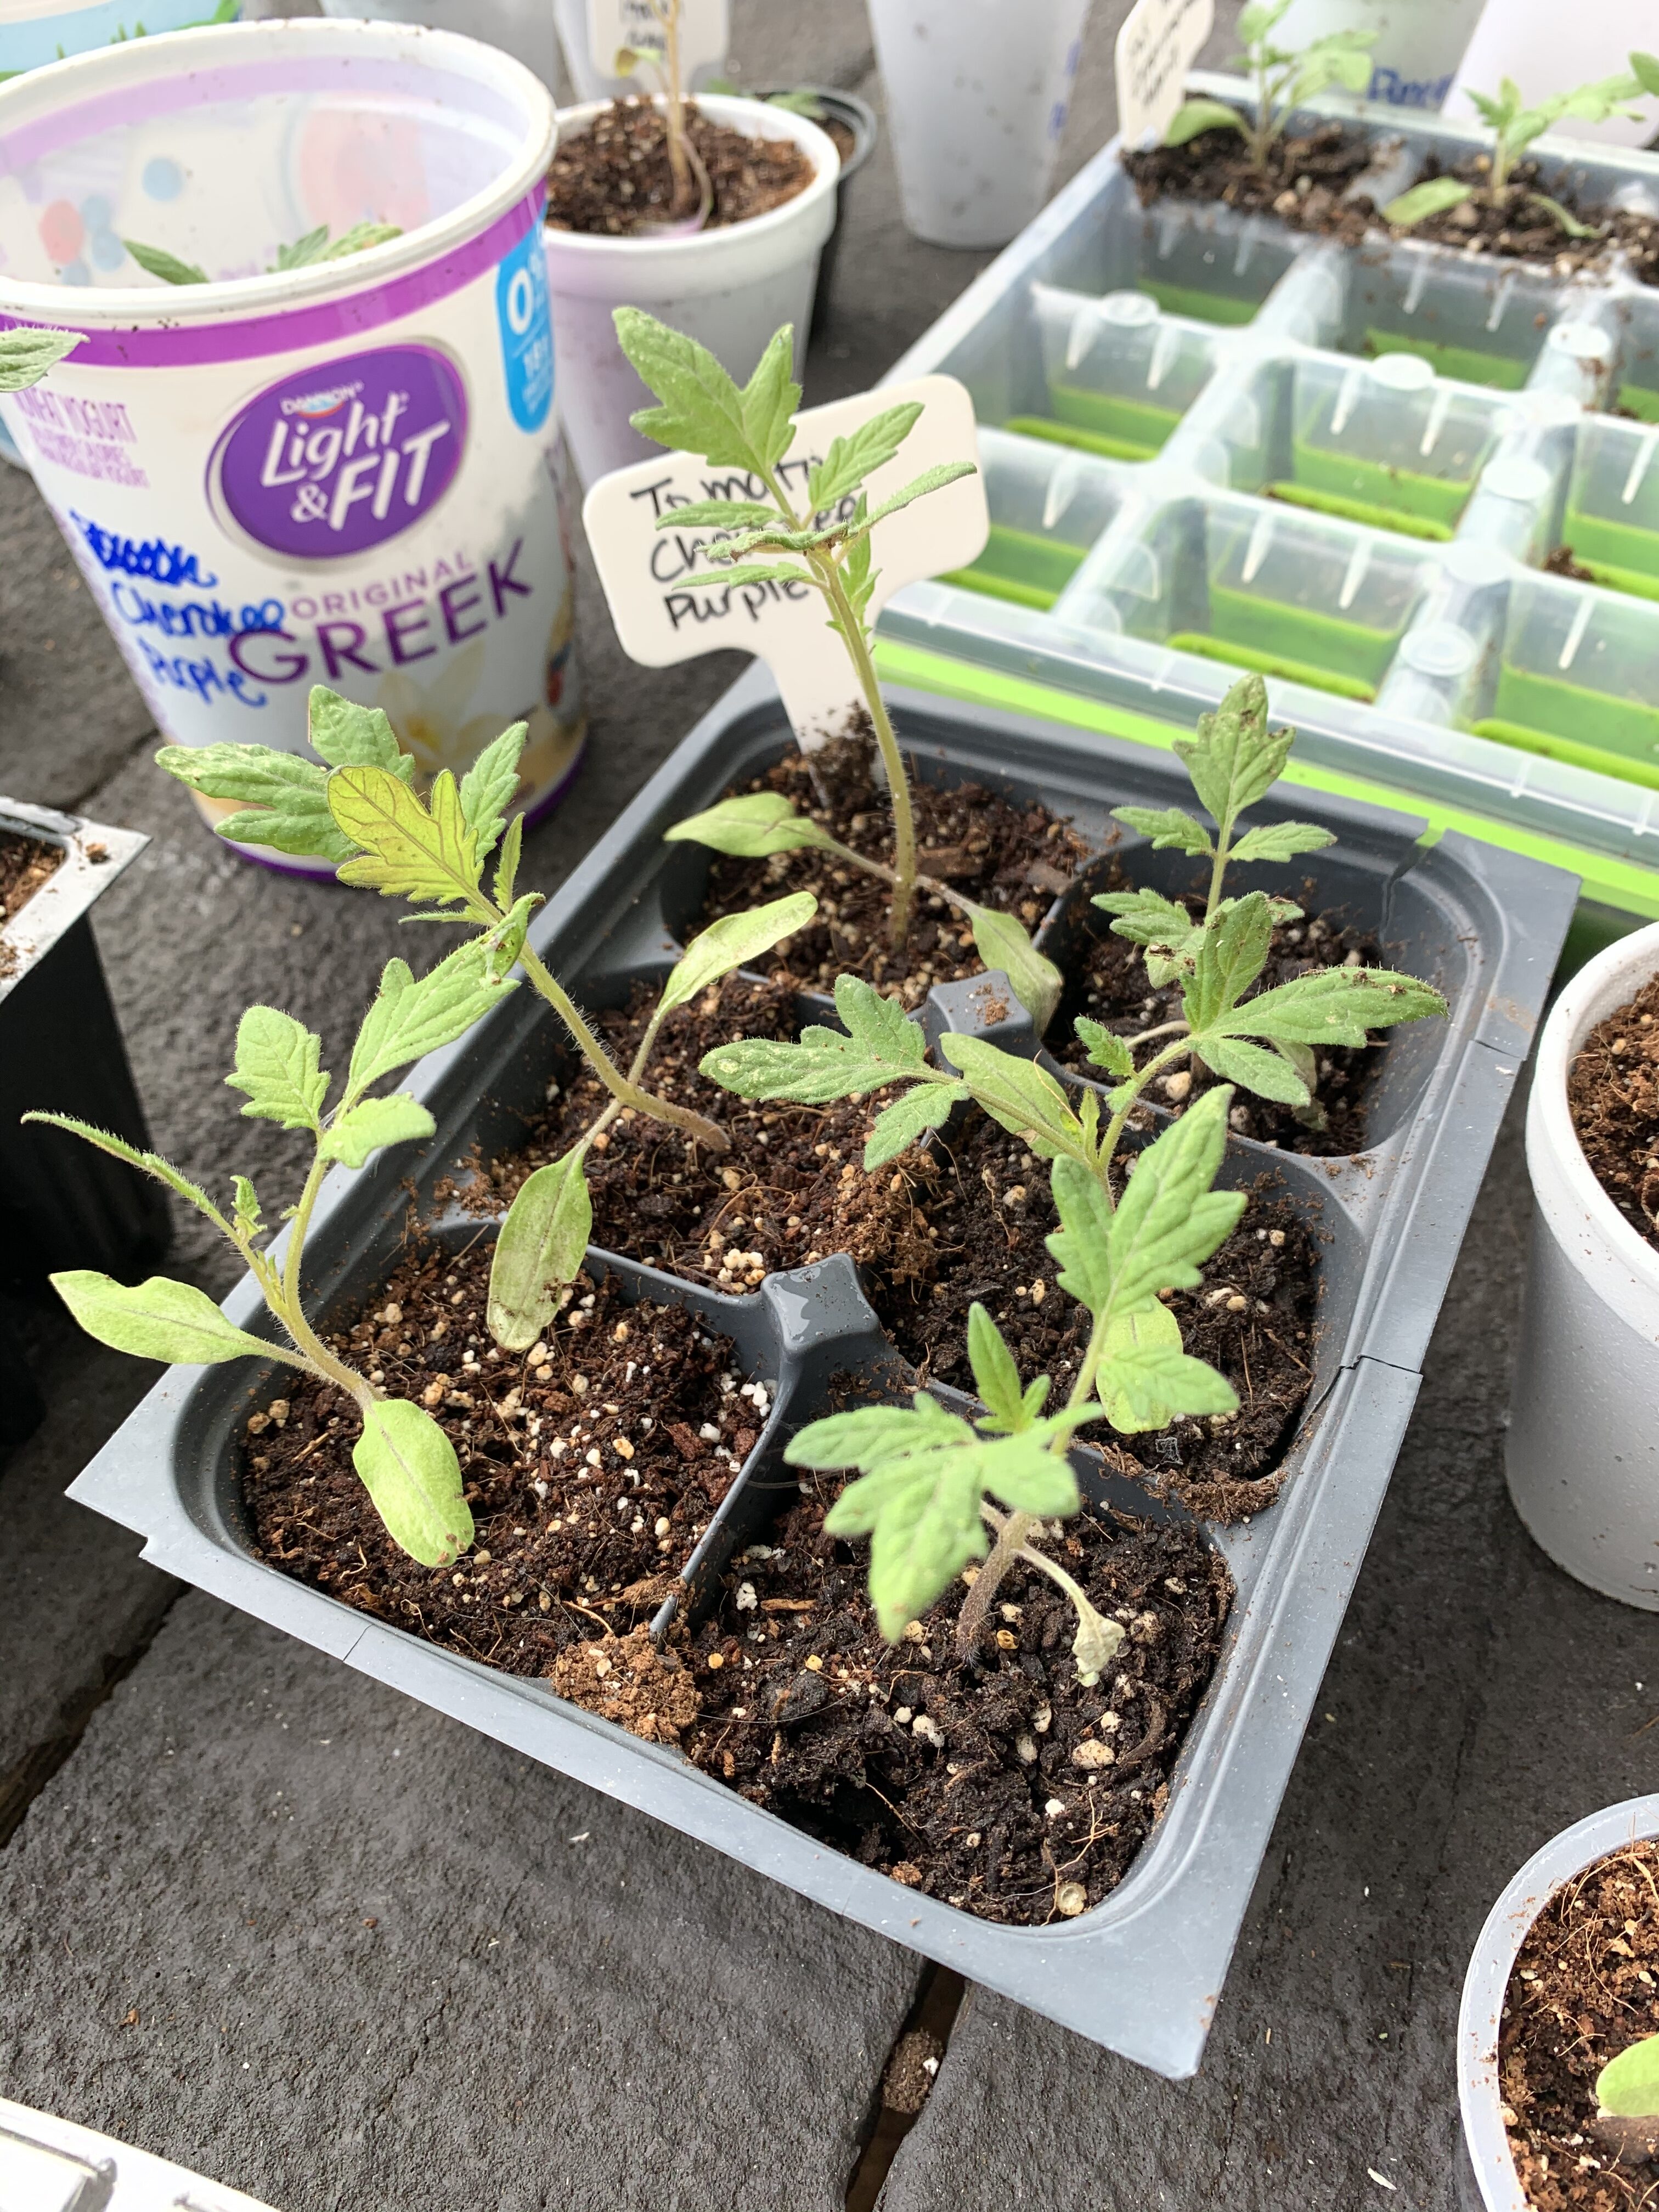 3E2C1B5A EF52 4B92 98F1 235BCF7B84AC Comparing Burpee Organic Seed Starting Mix vs Miracle Gro Moisture Control Potting Mix for transplanted tomato seedlings - Results